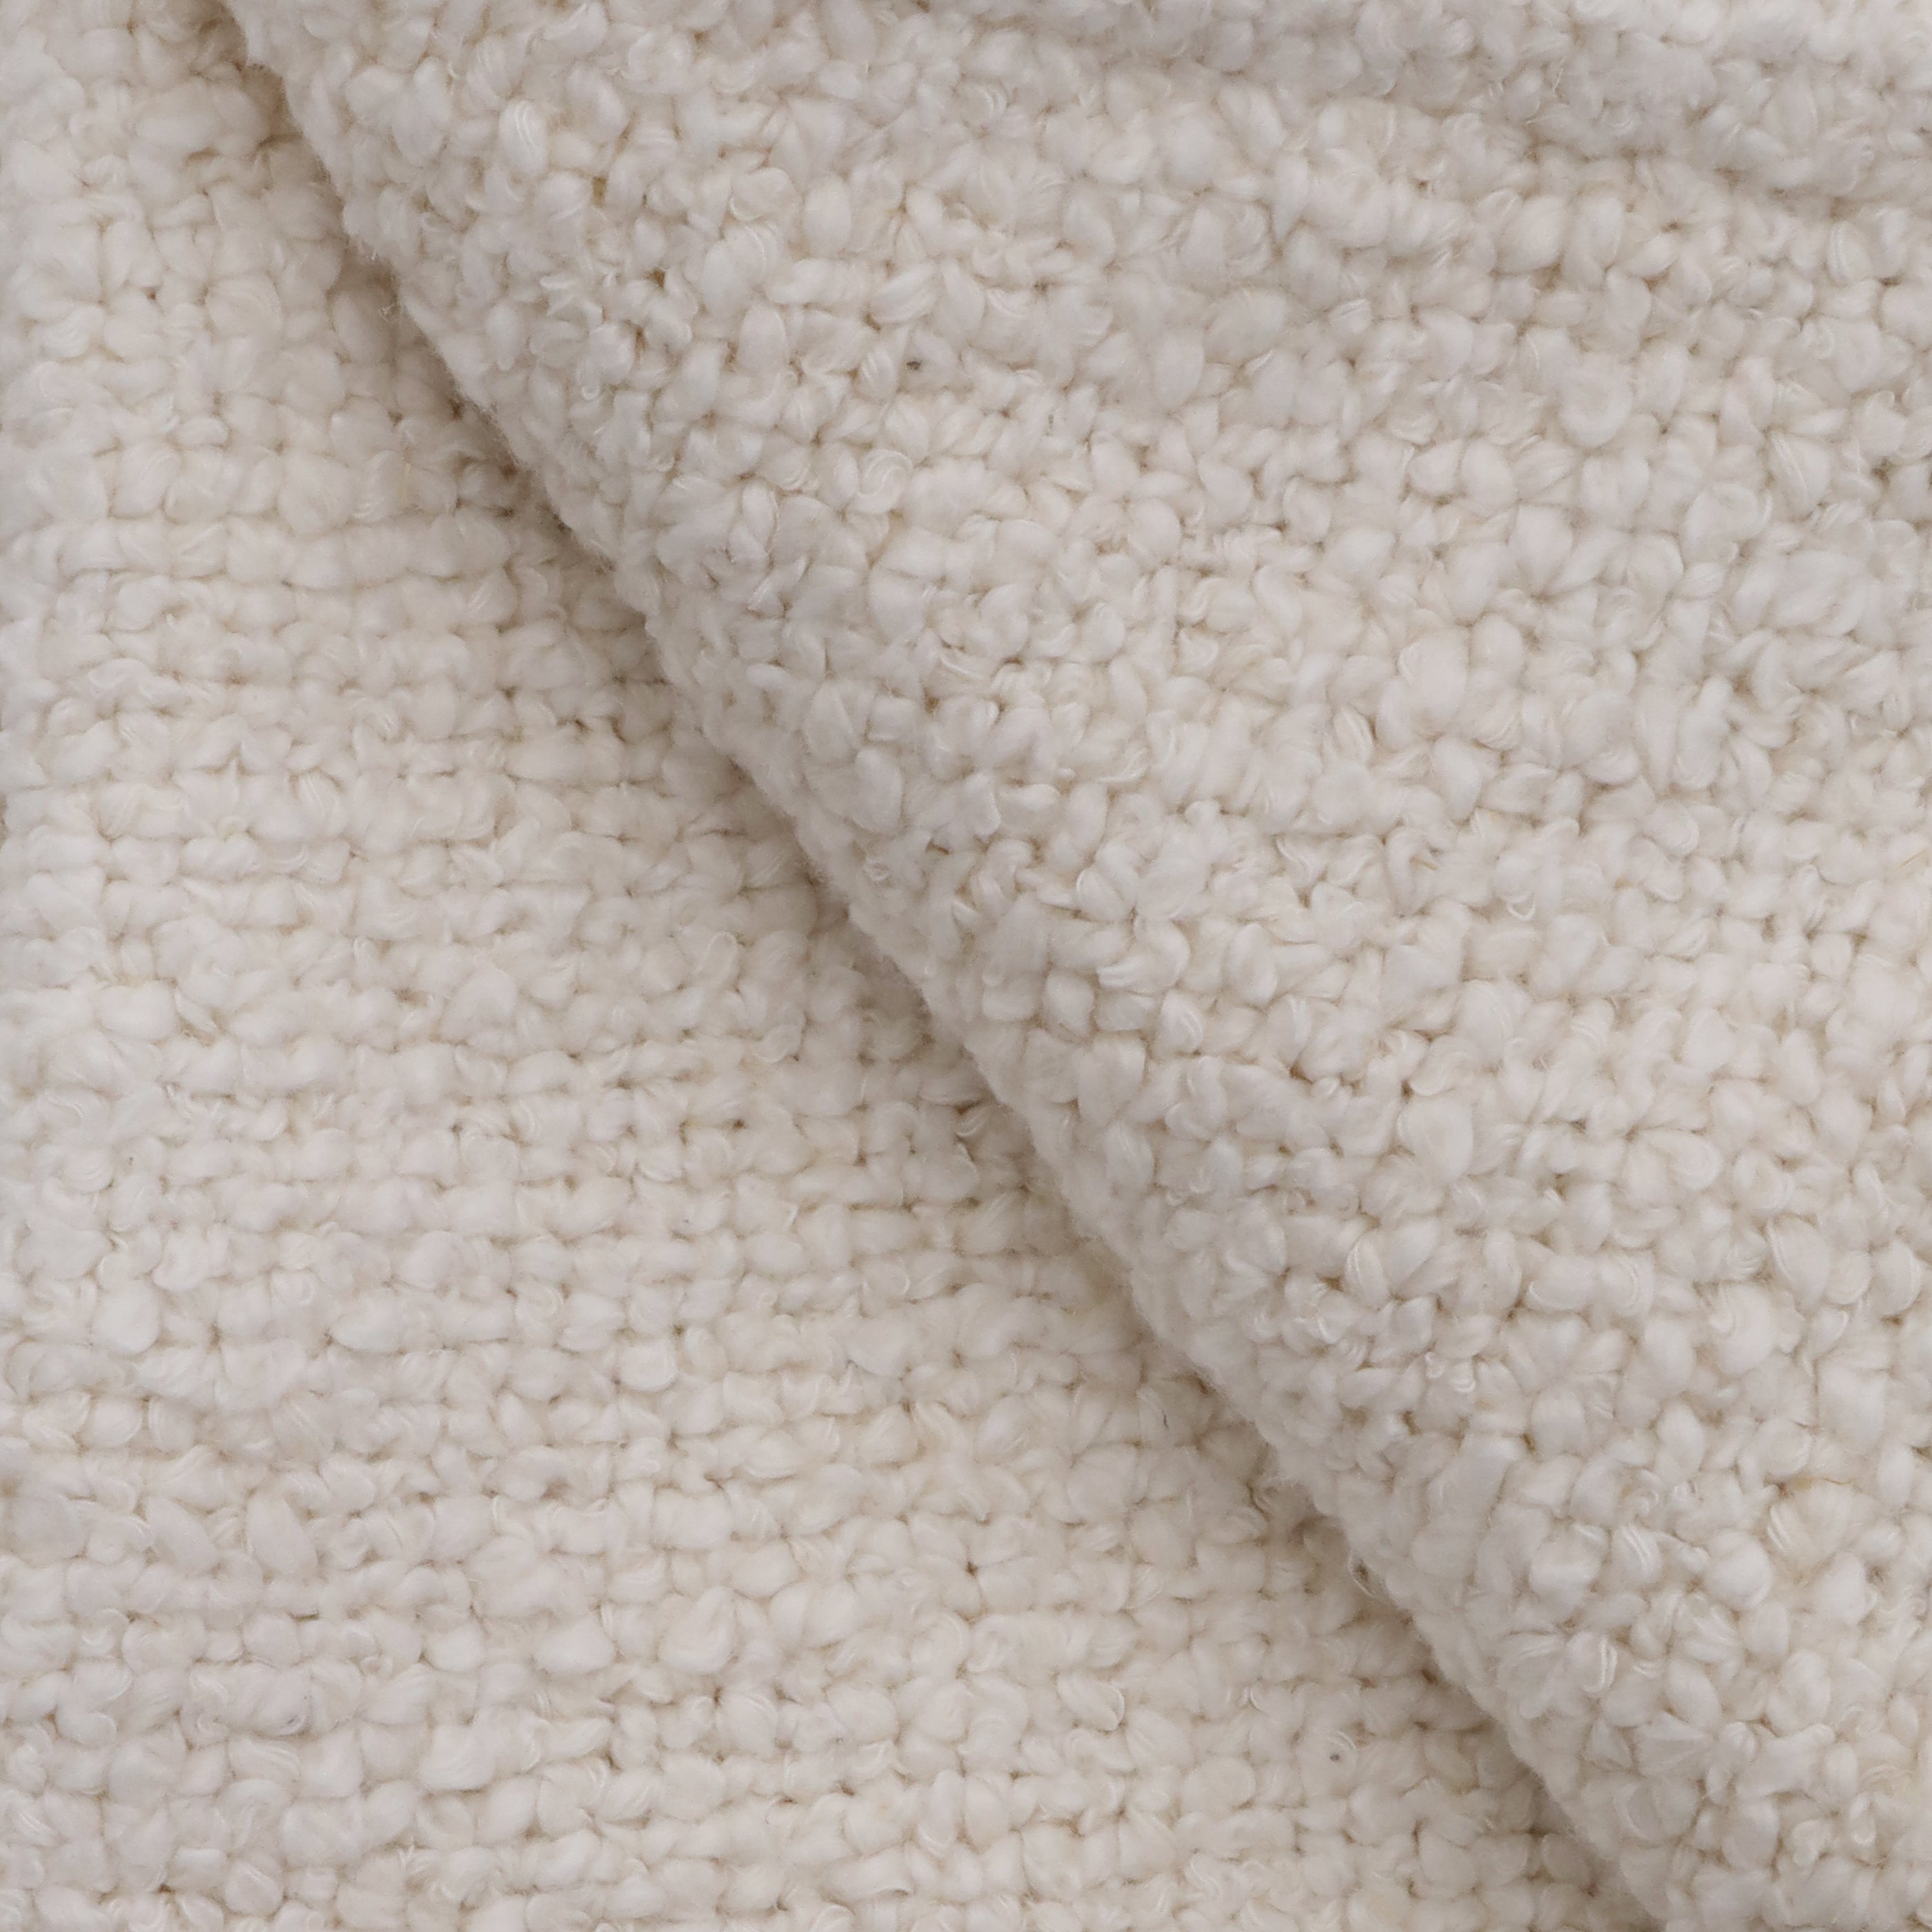 abby-throw-details-ivory